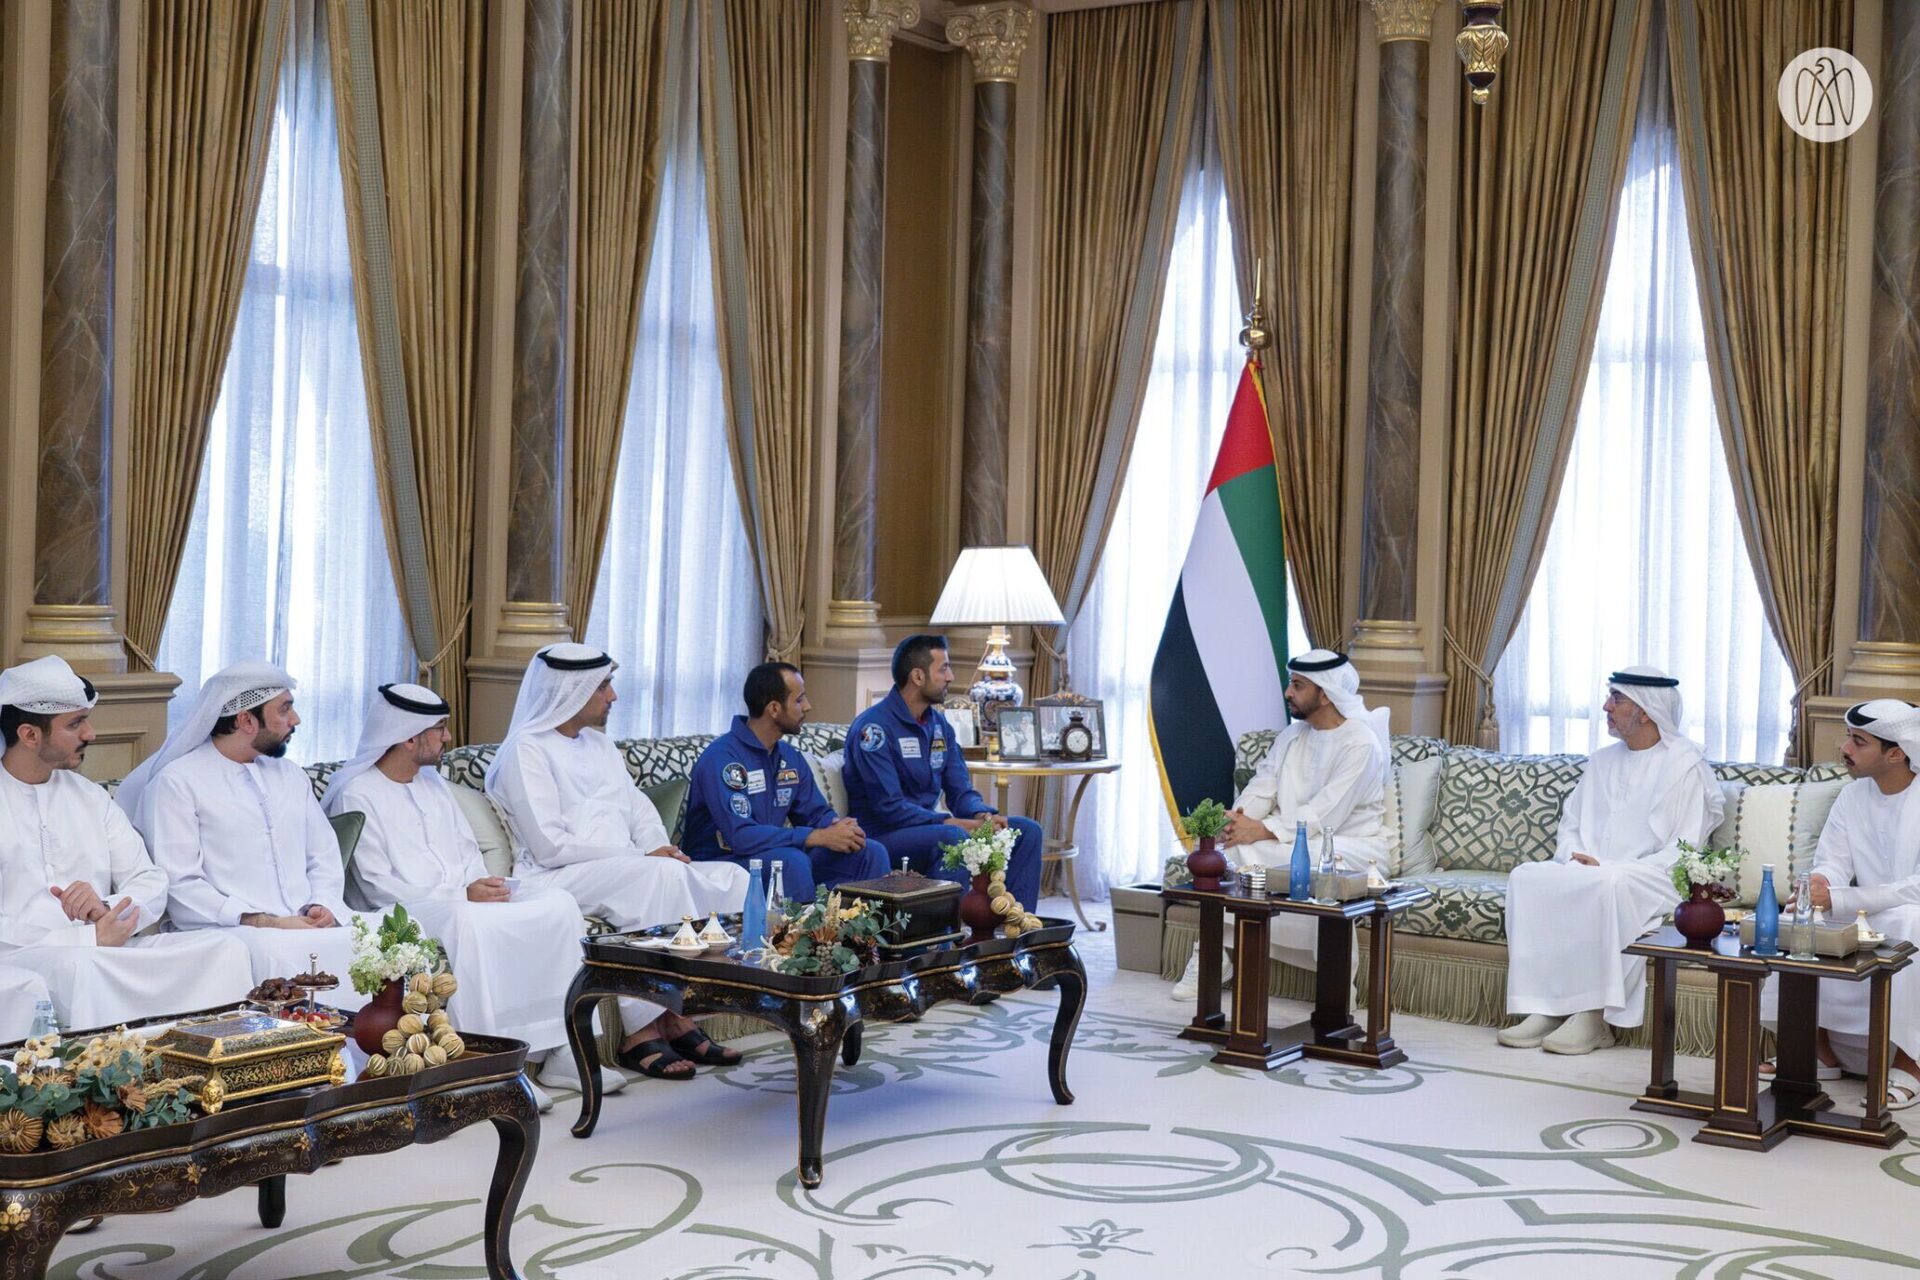 Sheikh Hamdan bin Zayed, a member of the UAE royal family, met on Wednesday with a delegation from the Mohammed Bin Rashid Space Centre, including astronaut Sultan Al Neyadi. (Photo: Abu Dhabi Media Office)